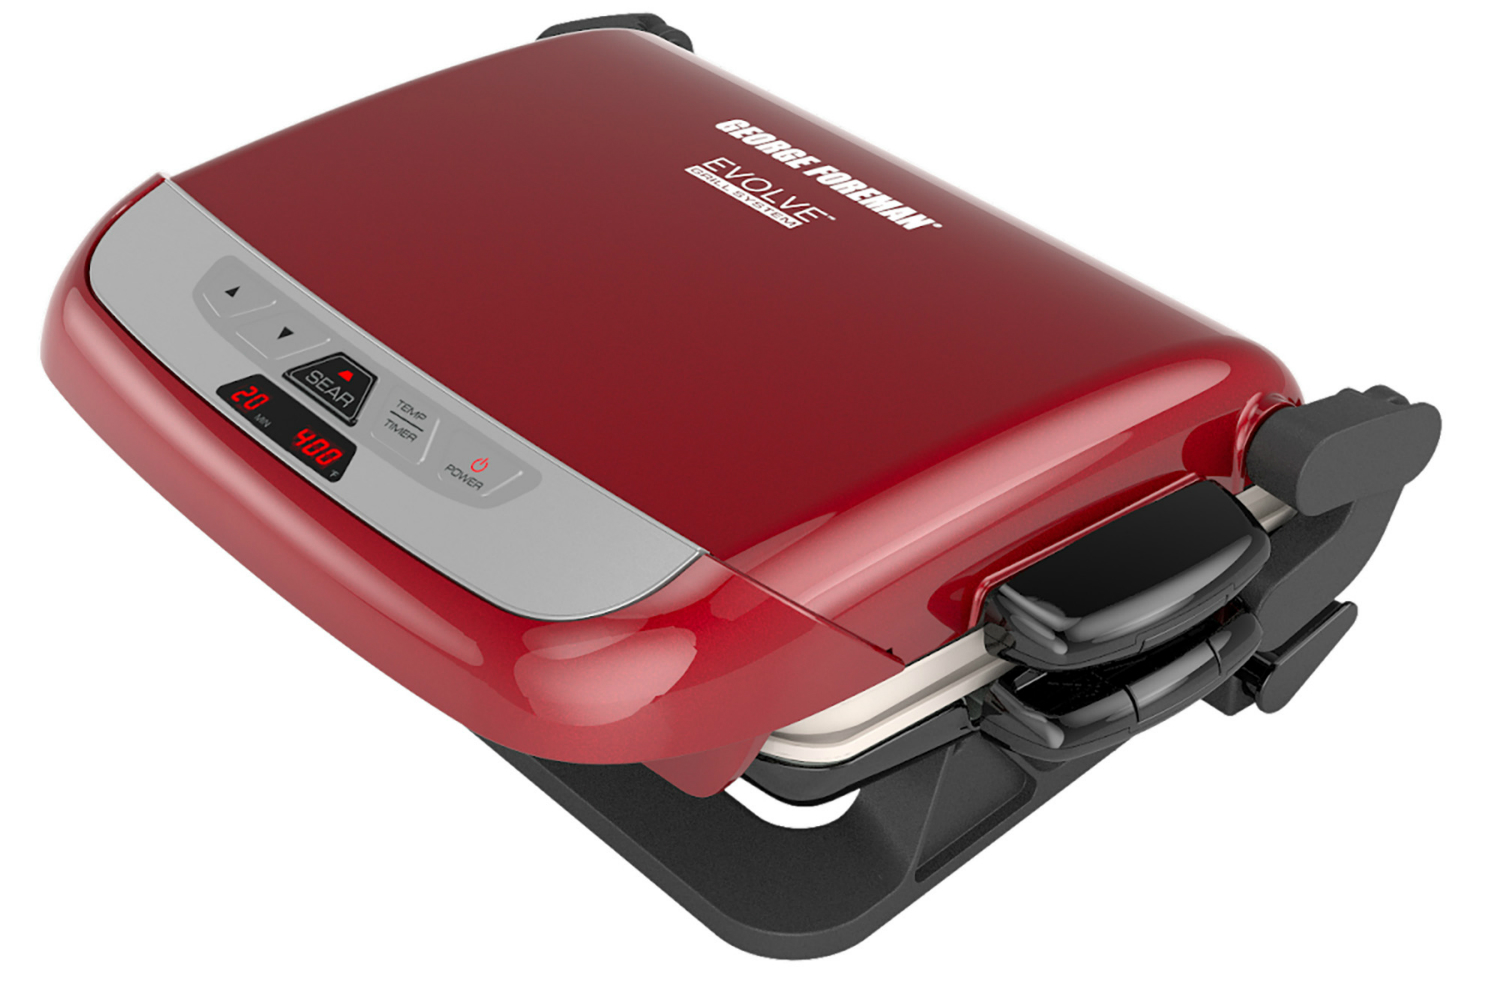 walmart deals on george foreman electric grills and griddles evolve 5 serving multi plate grill system indoor with ceramic pl